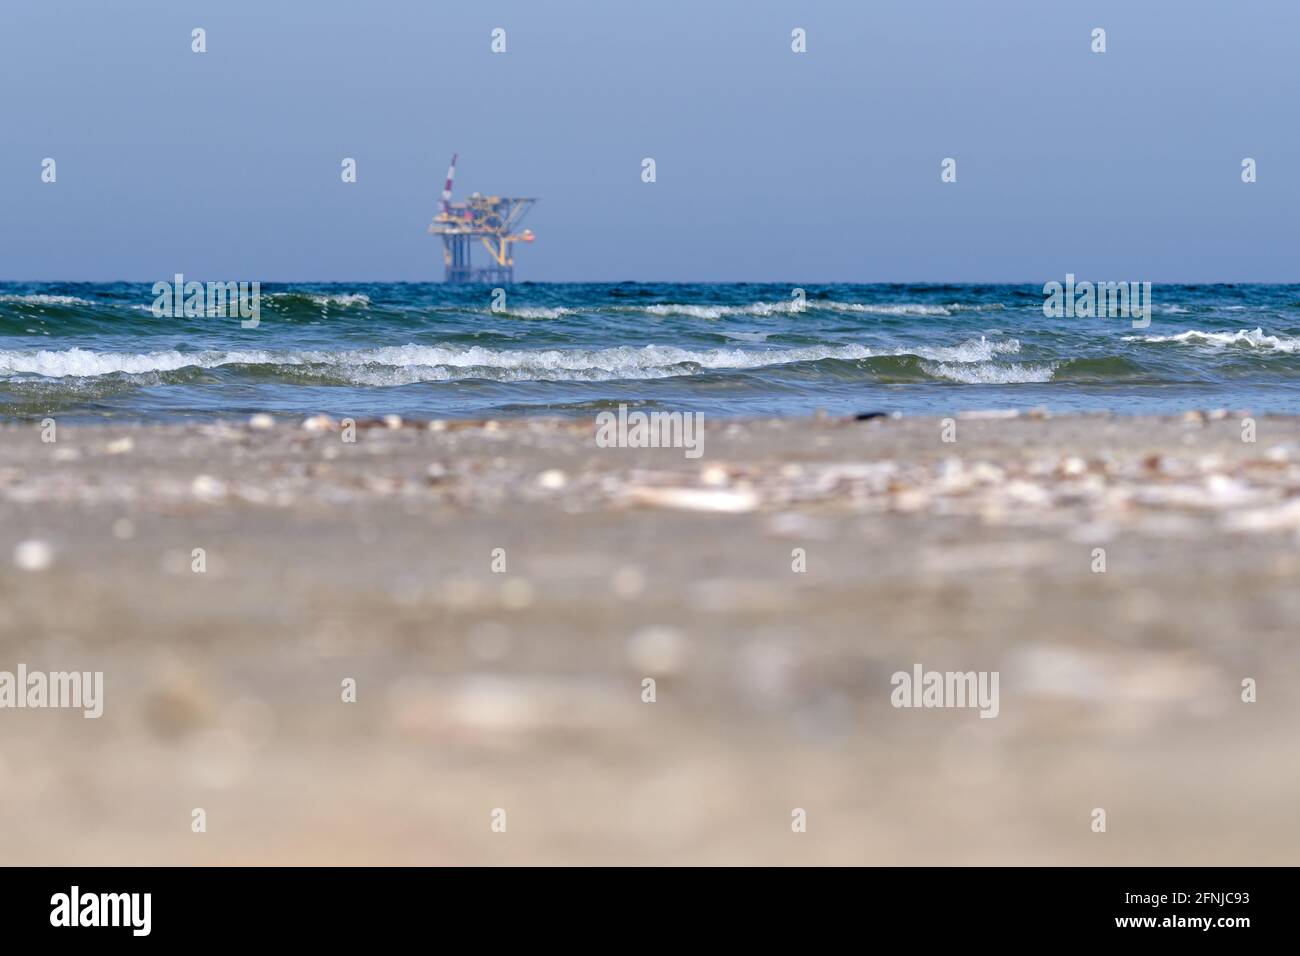 Ameland,Netherlands April 20,2021-NAM, Oil rig, offshore platform with beach, sand and surf. Natural gas extraction in the Wadden-North Sea Region Stock Photo